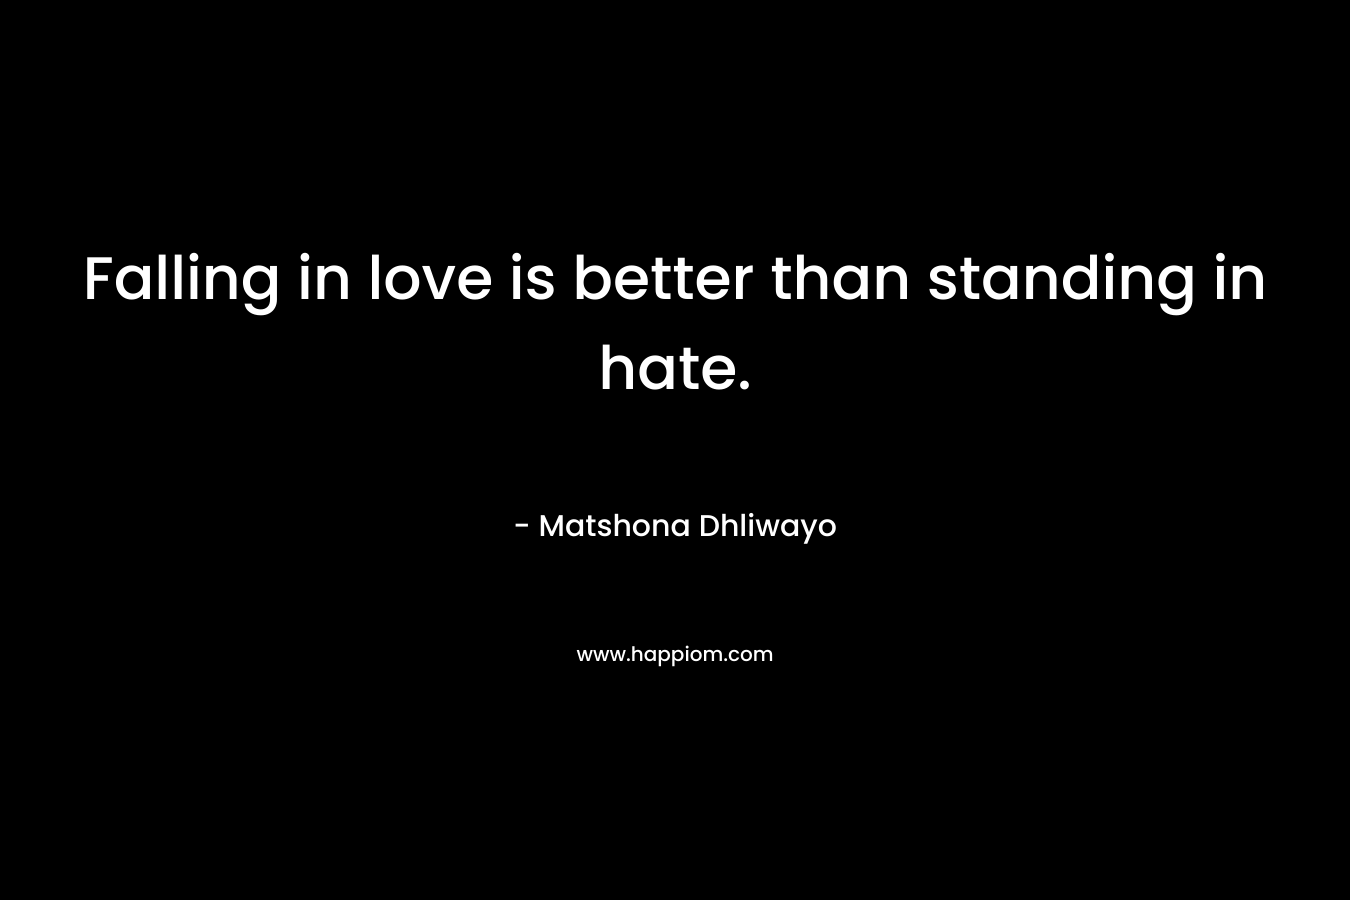 Falling in love is better than standing in hate.